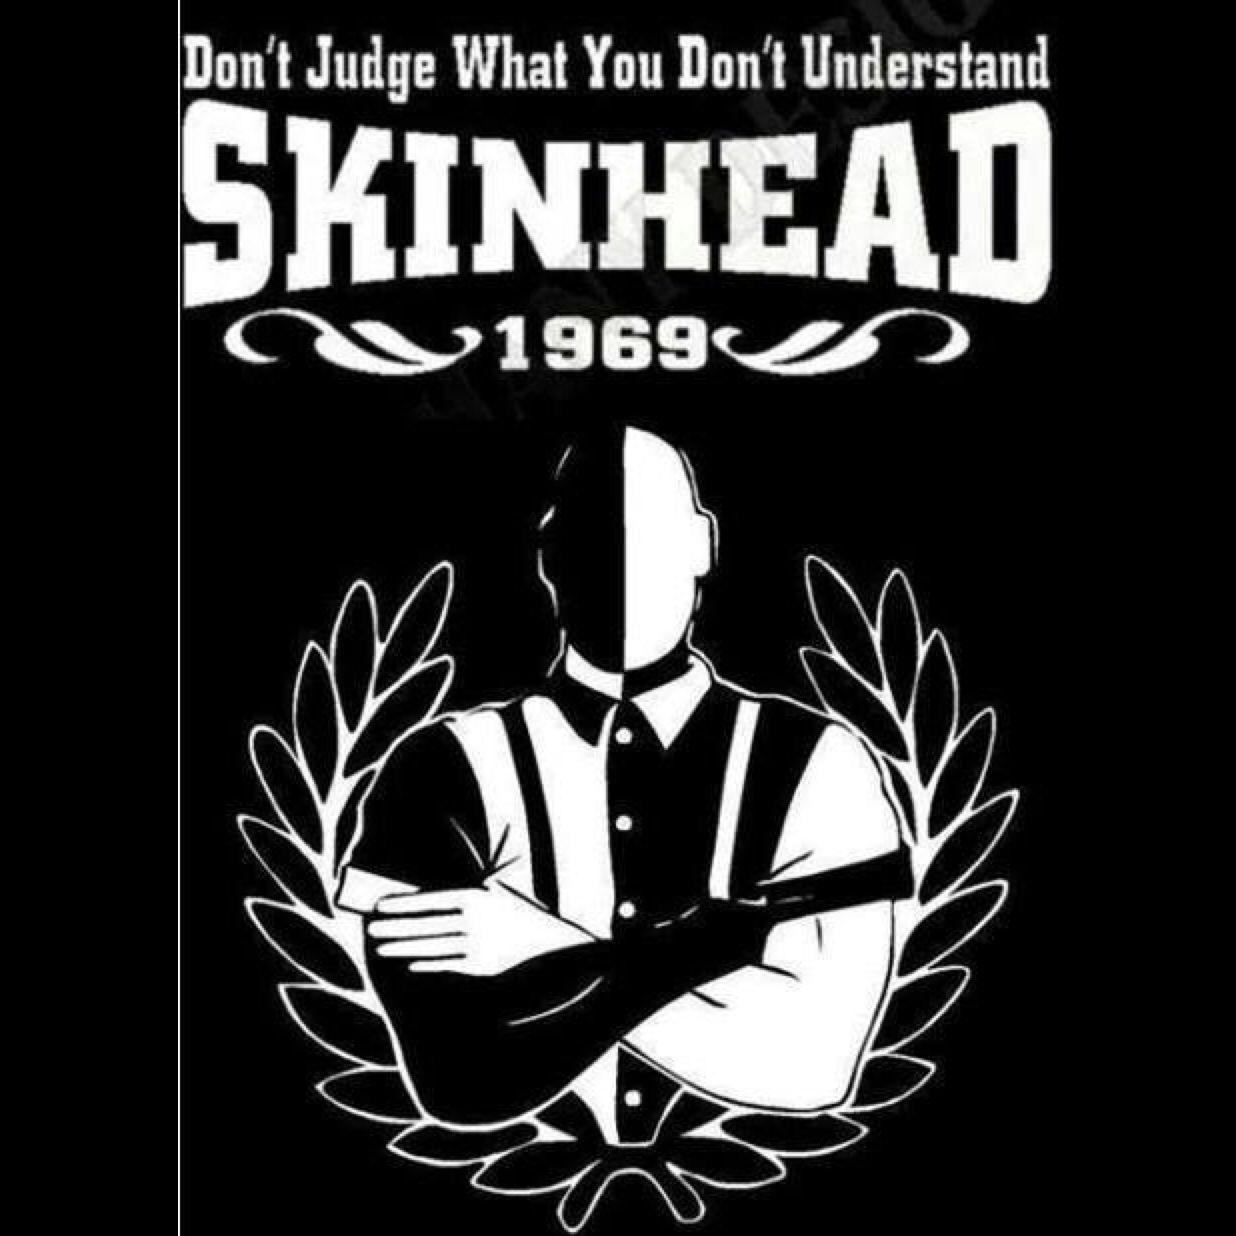 Skinhead Logo - It not always about fighting it way of life working class | Trad ...